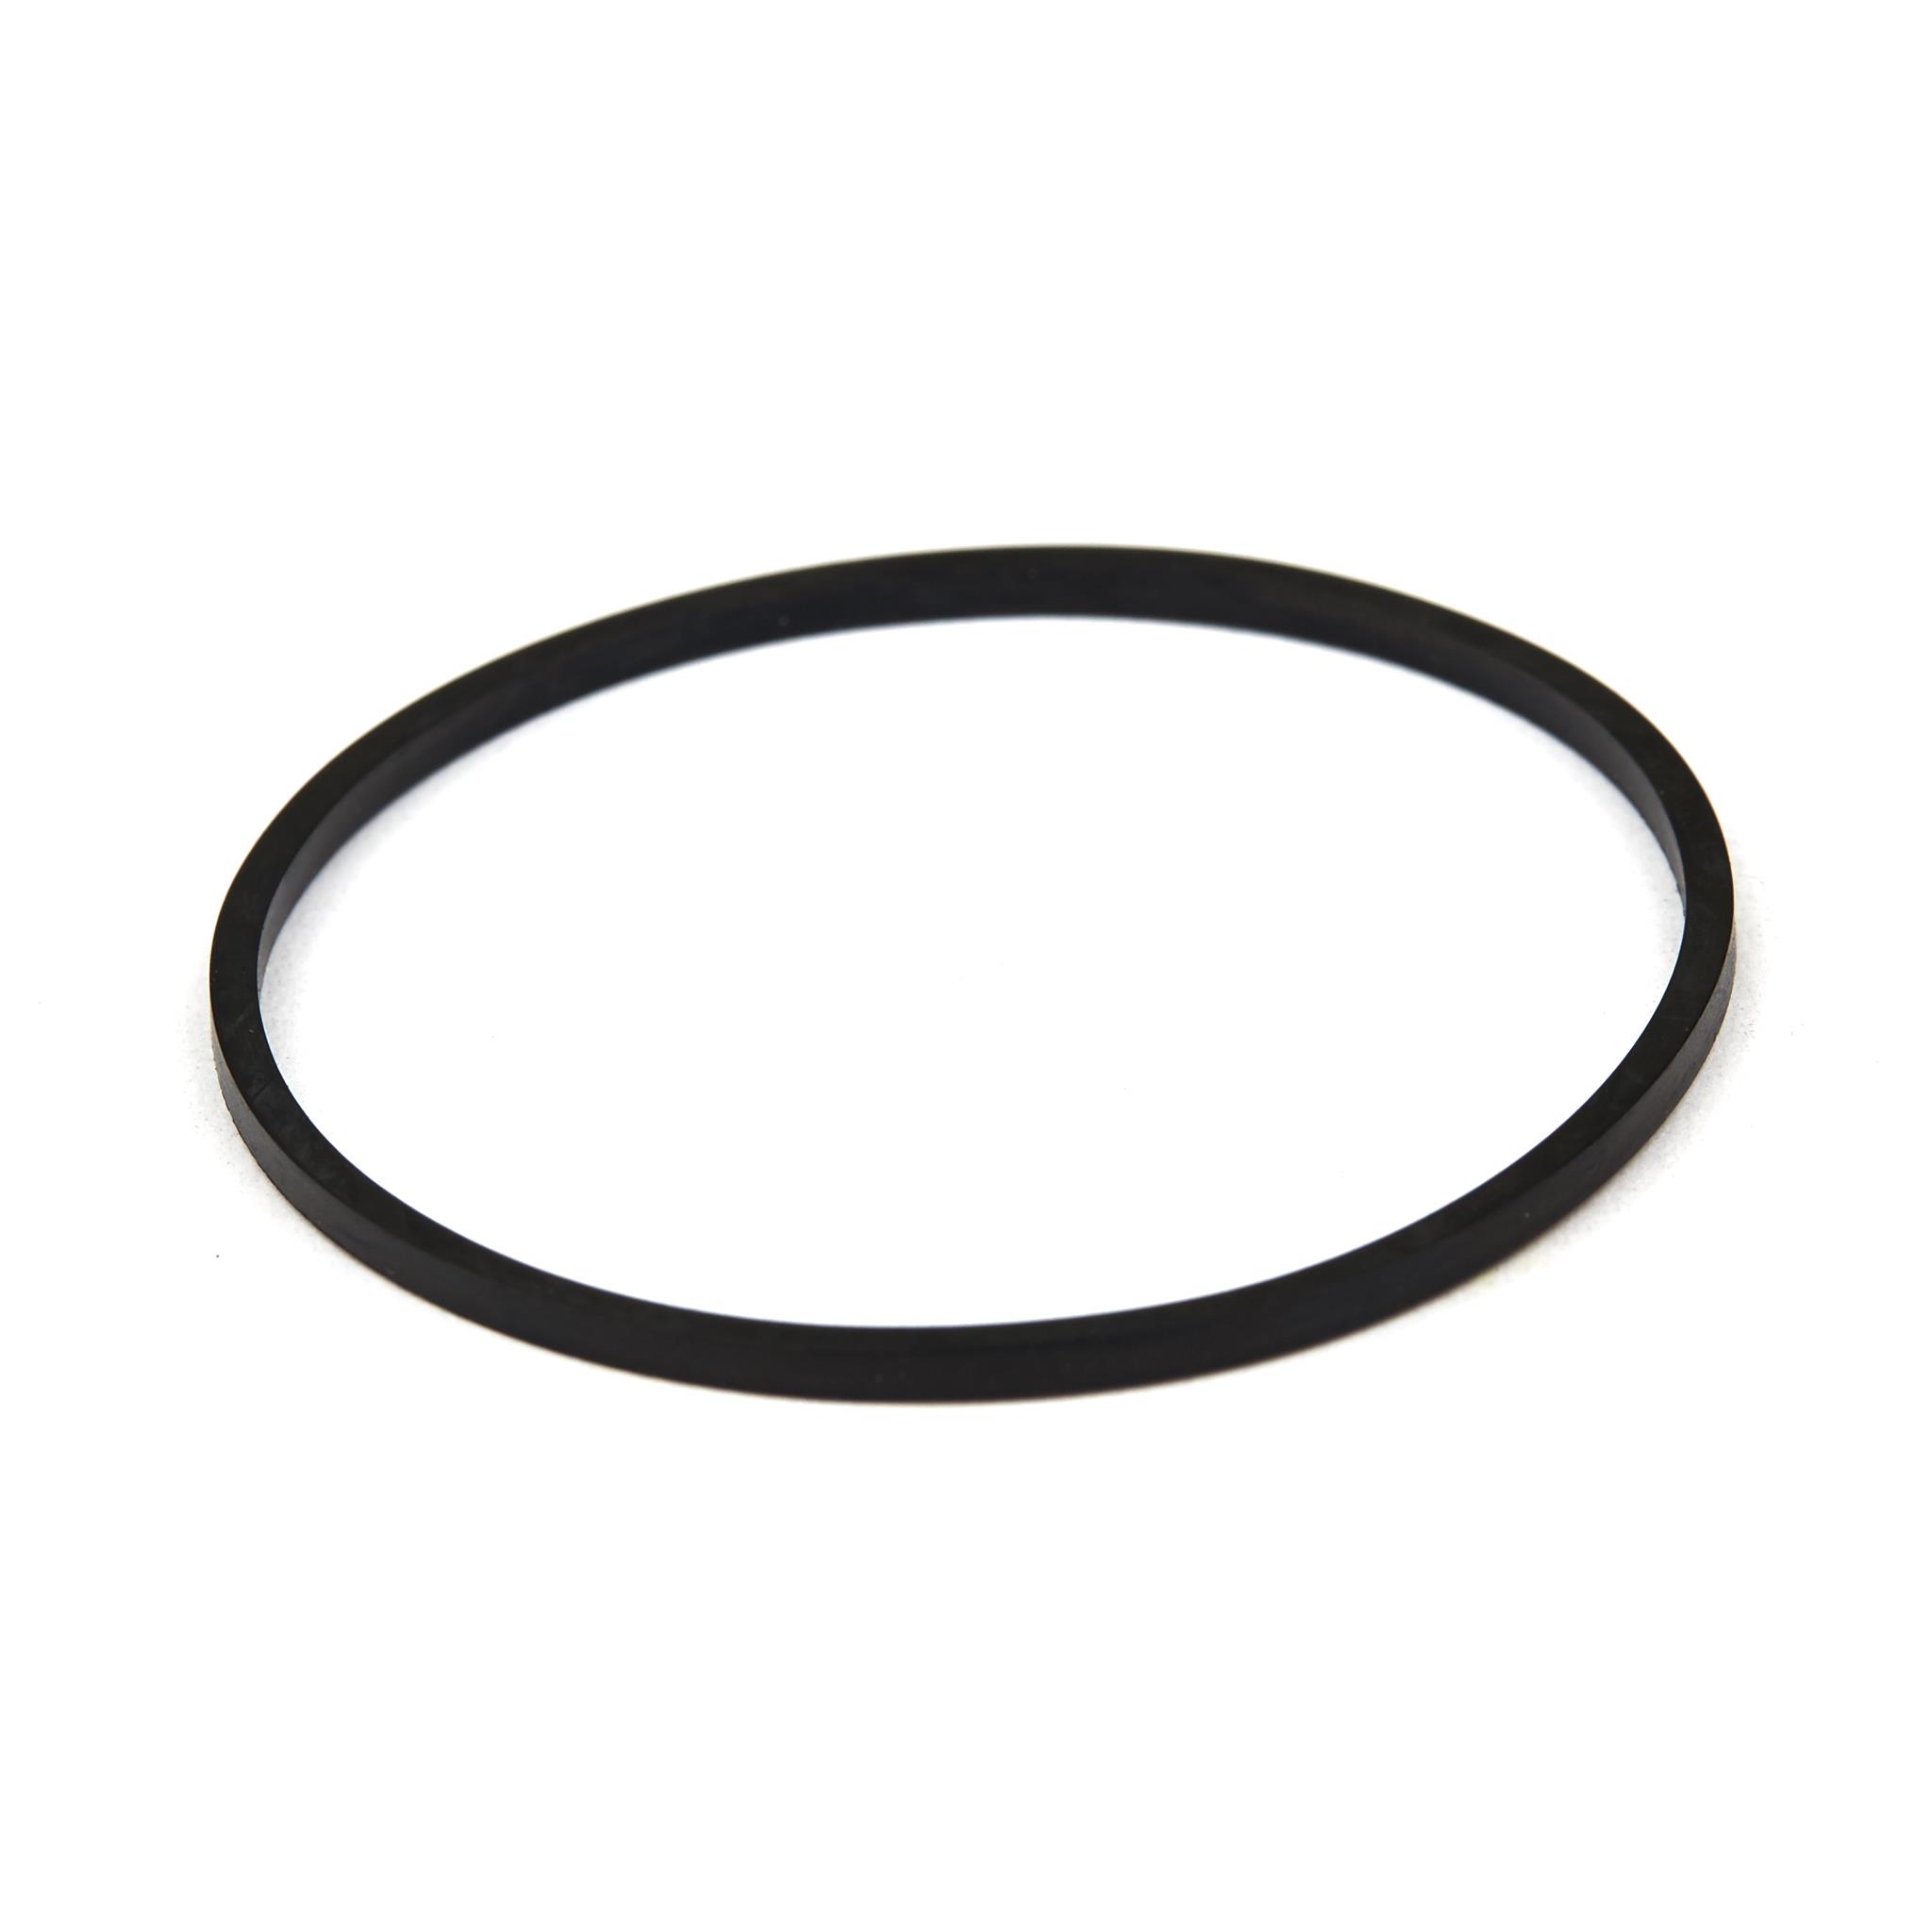 GASKET-FLOAT BOWL part# 693981 by Briggs & Stratton